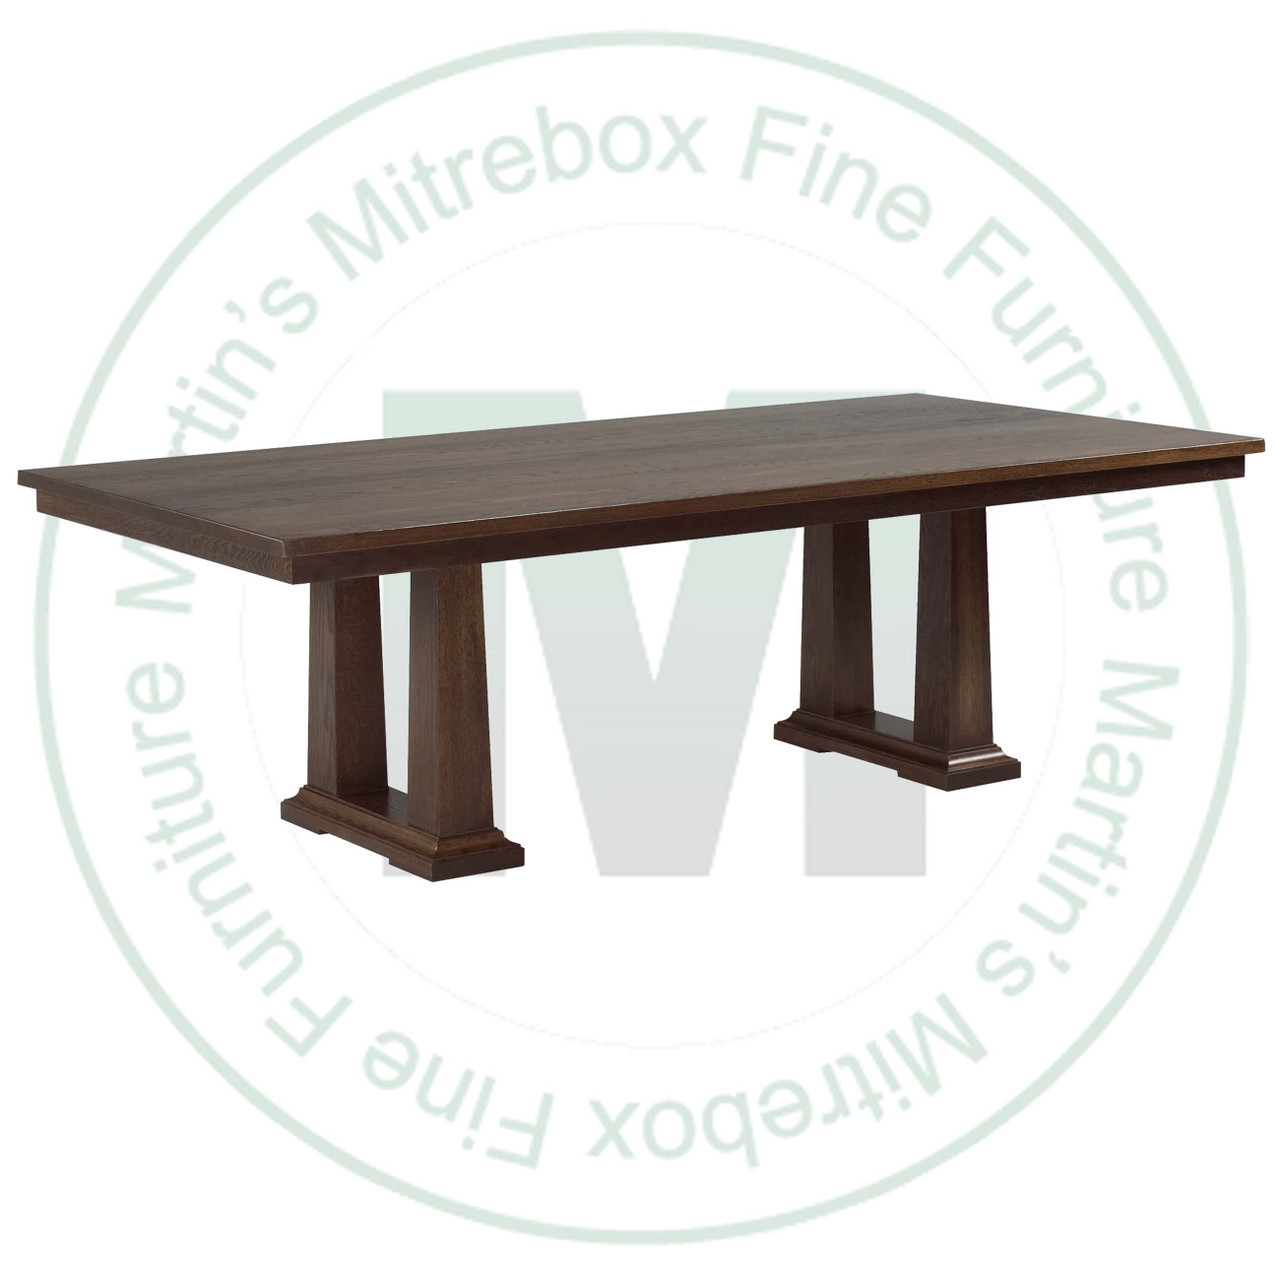 Maple Acropolis Extension Double Pedestal Table 42''D x 84''W x 30''H With 2 - 12'' Leaves Table Has 1.75'' Thick Top